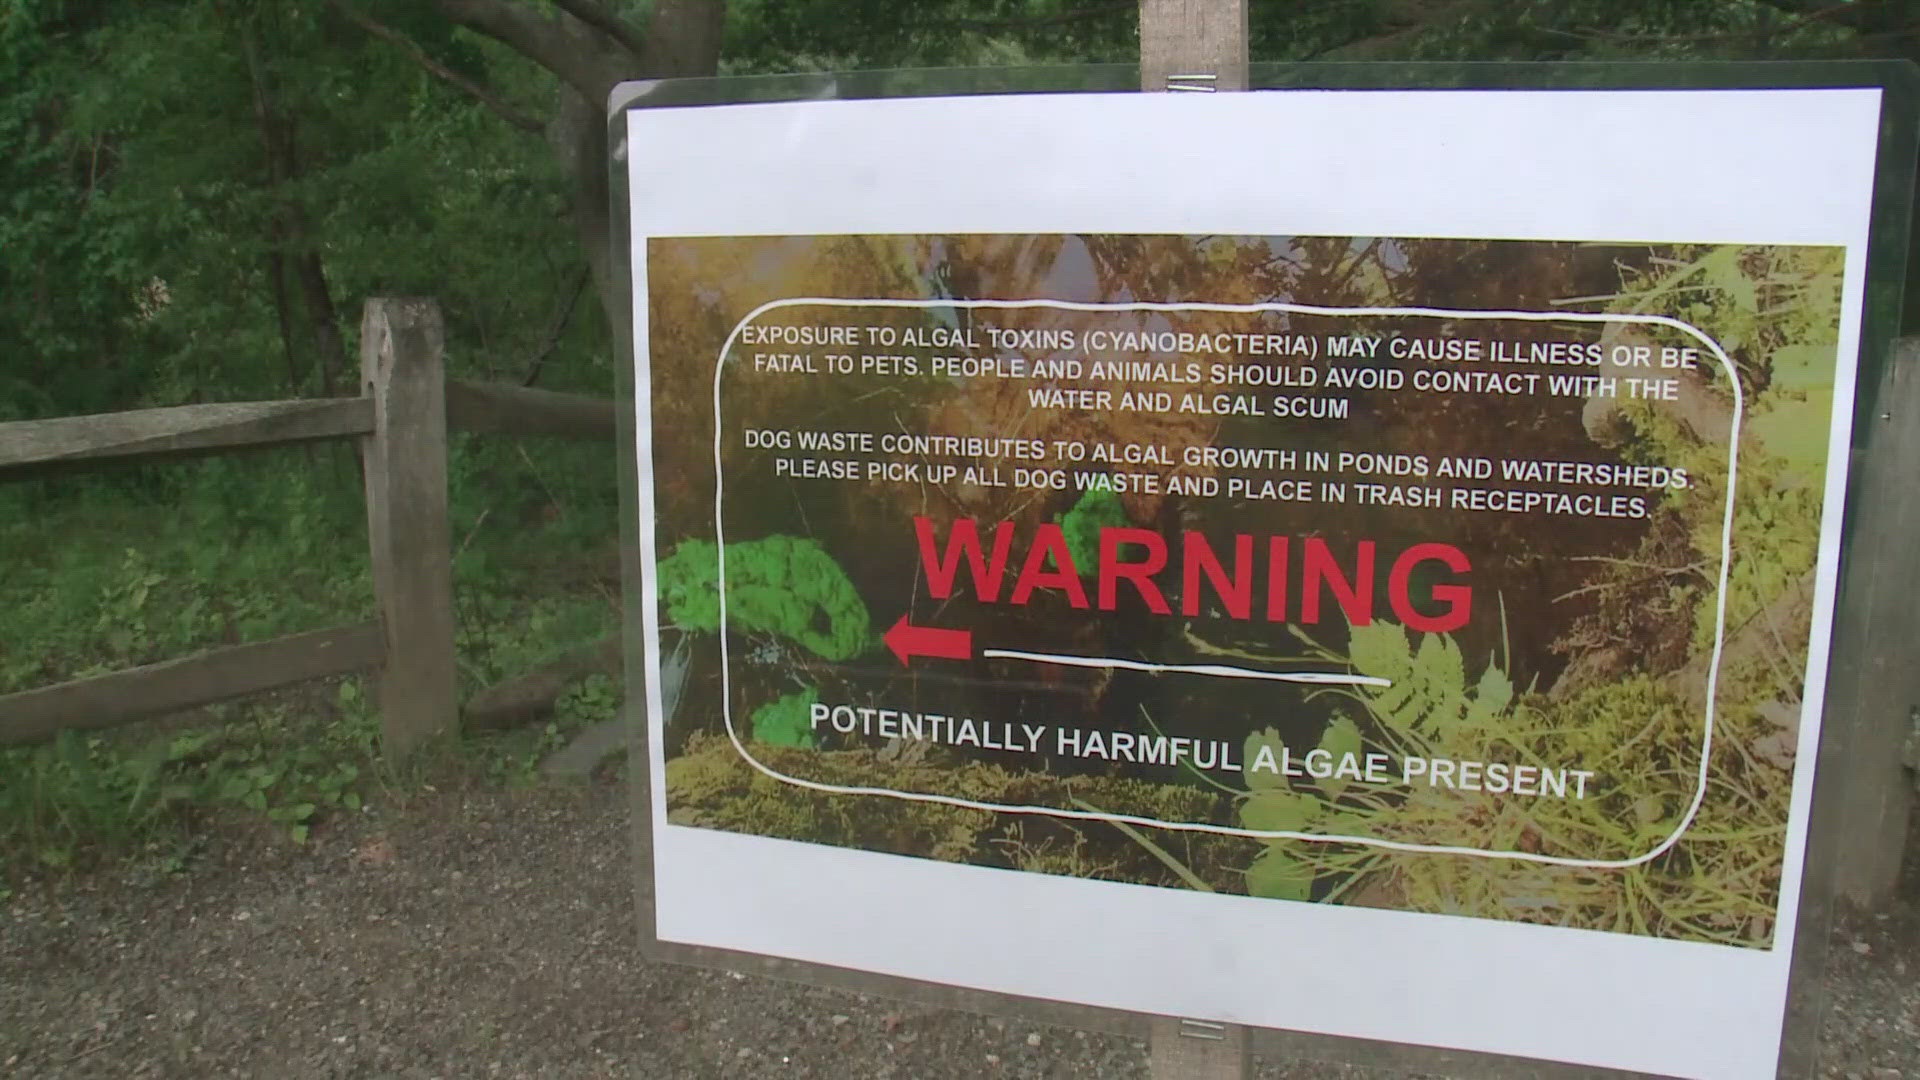 South Portland Parks and Recreation alerted the public of a toxic algae called cyanobacteria growing in the park's ponds, which can be fatal if pets ingest it.